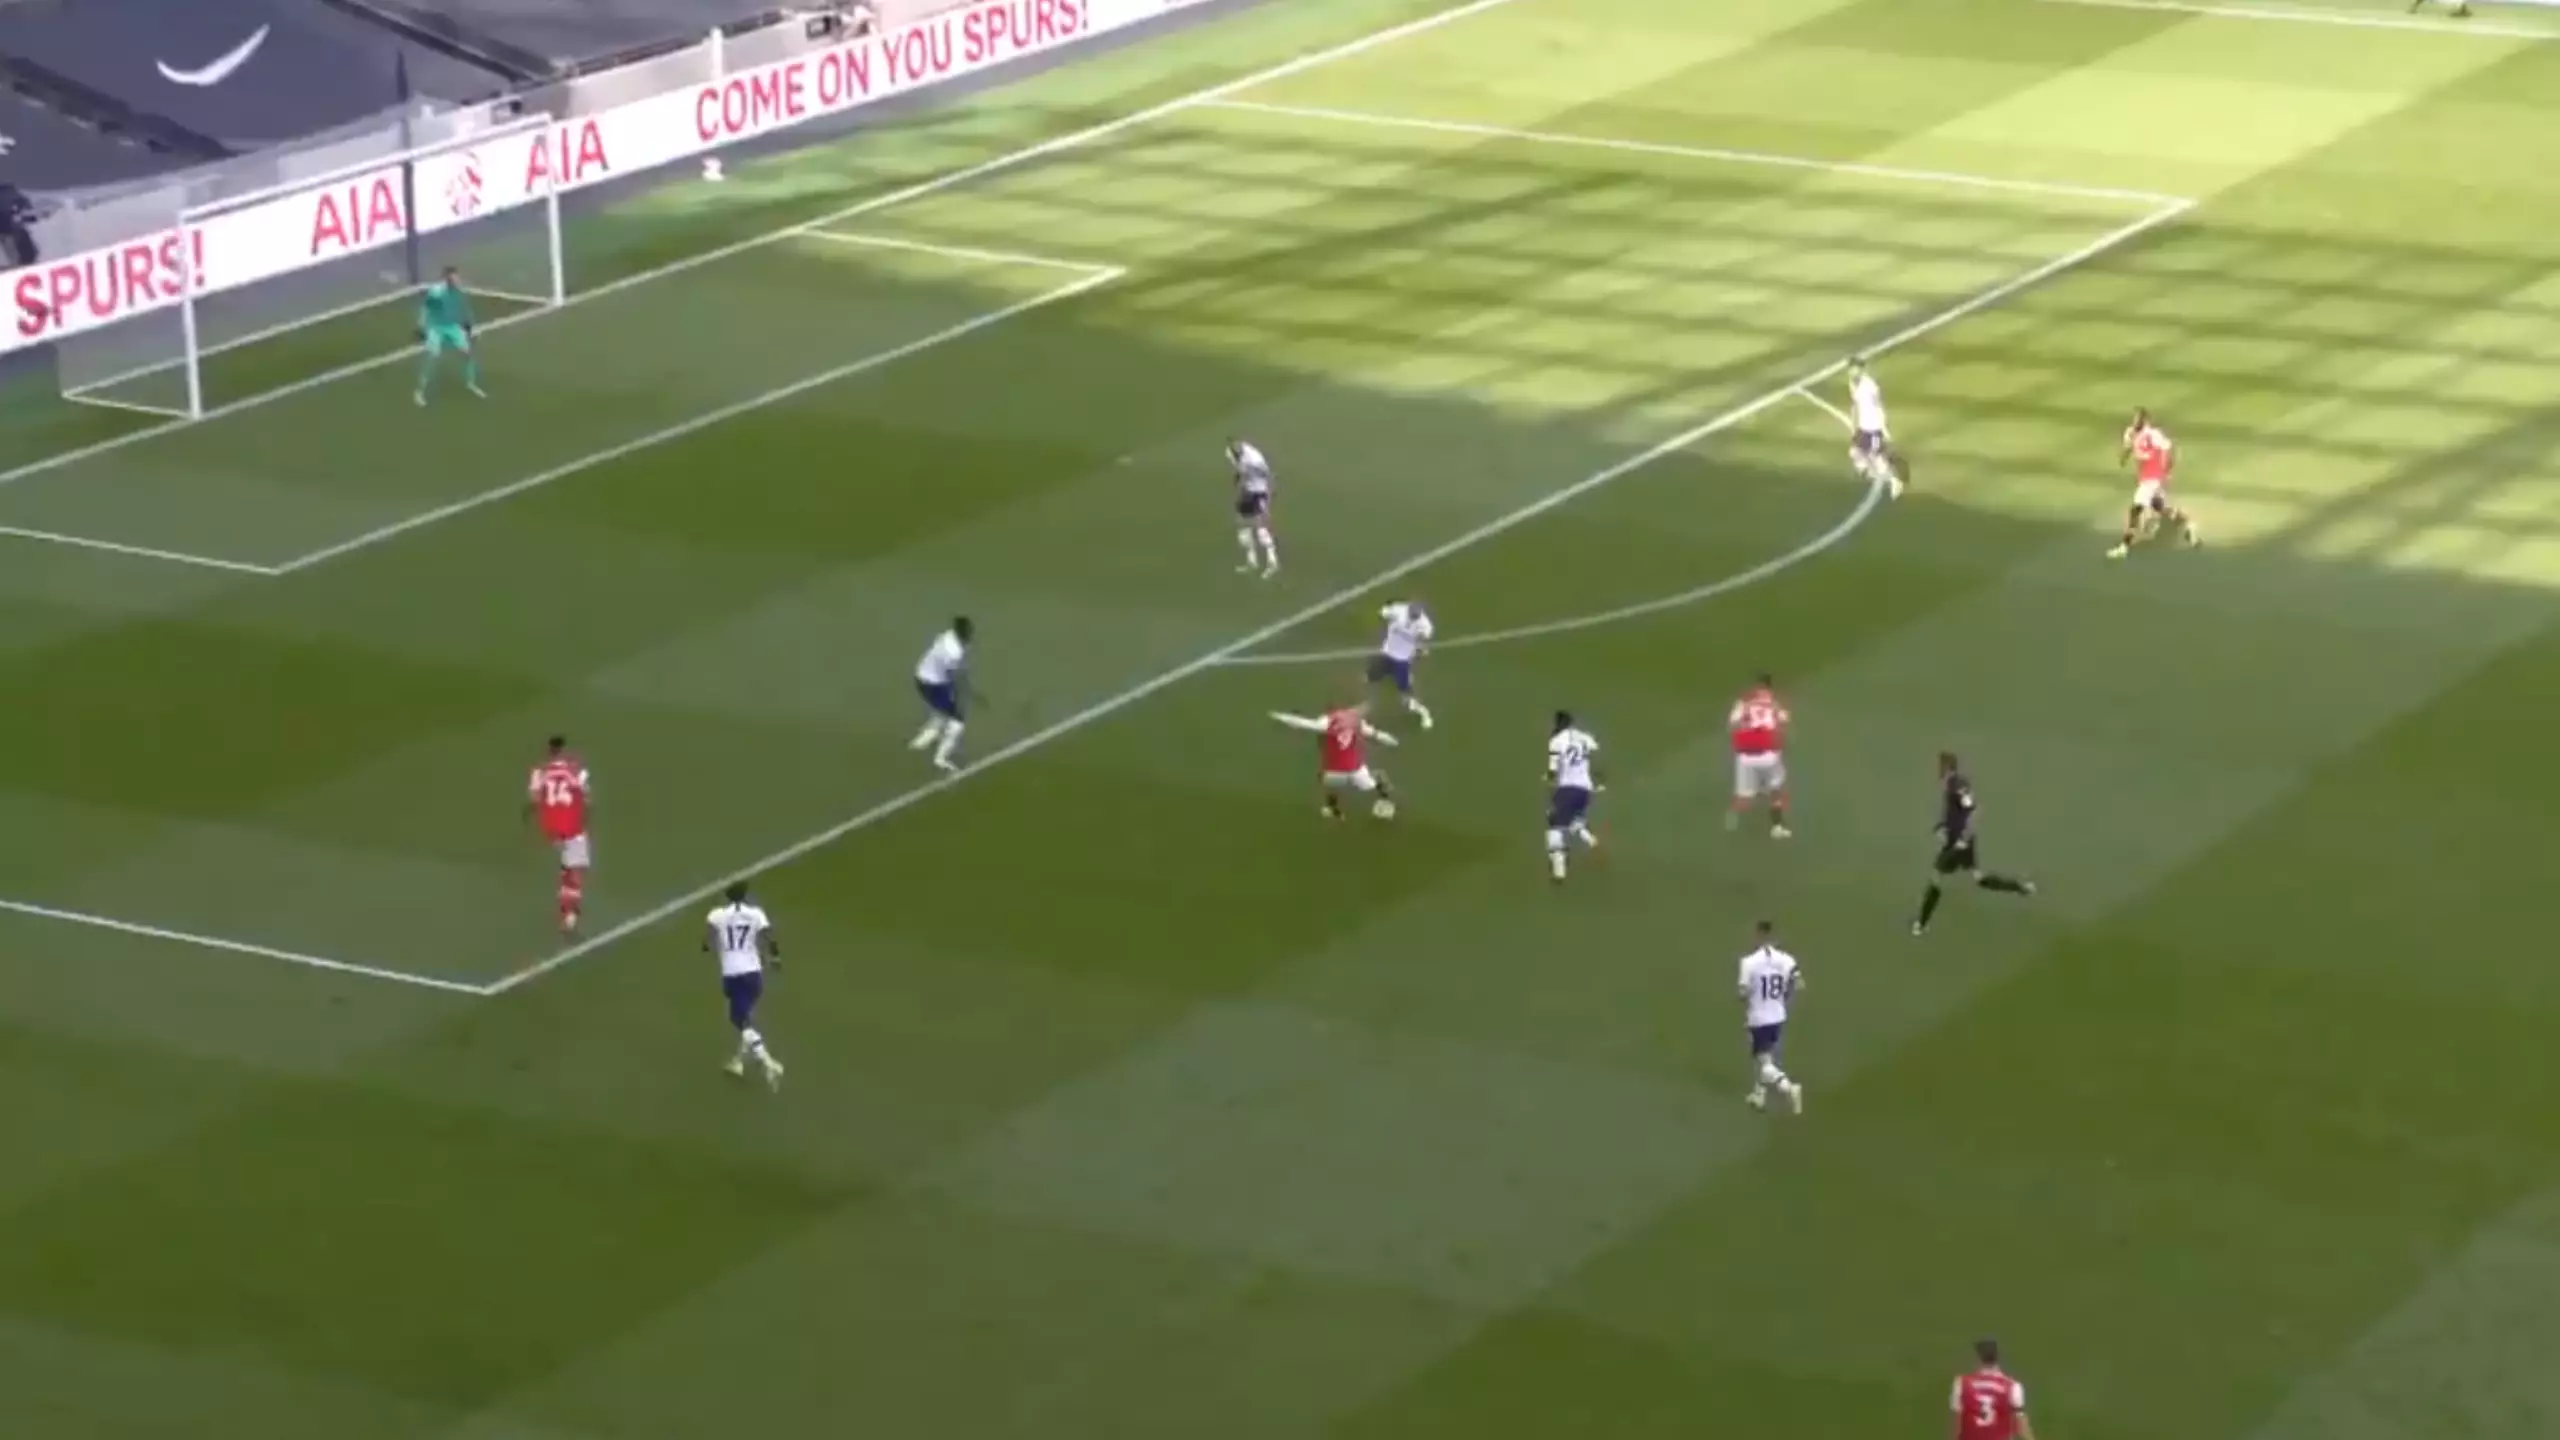 Alexandre Lacazette Scored An Absolute Screamer To Give Arsenal The Lead In North London Derby